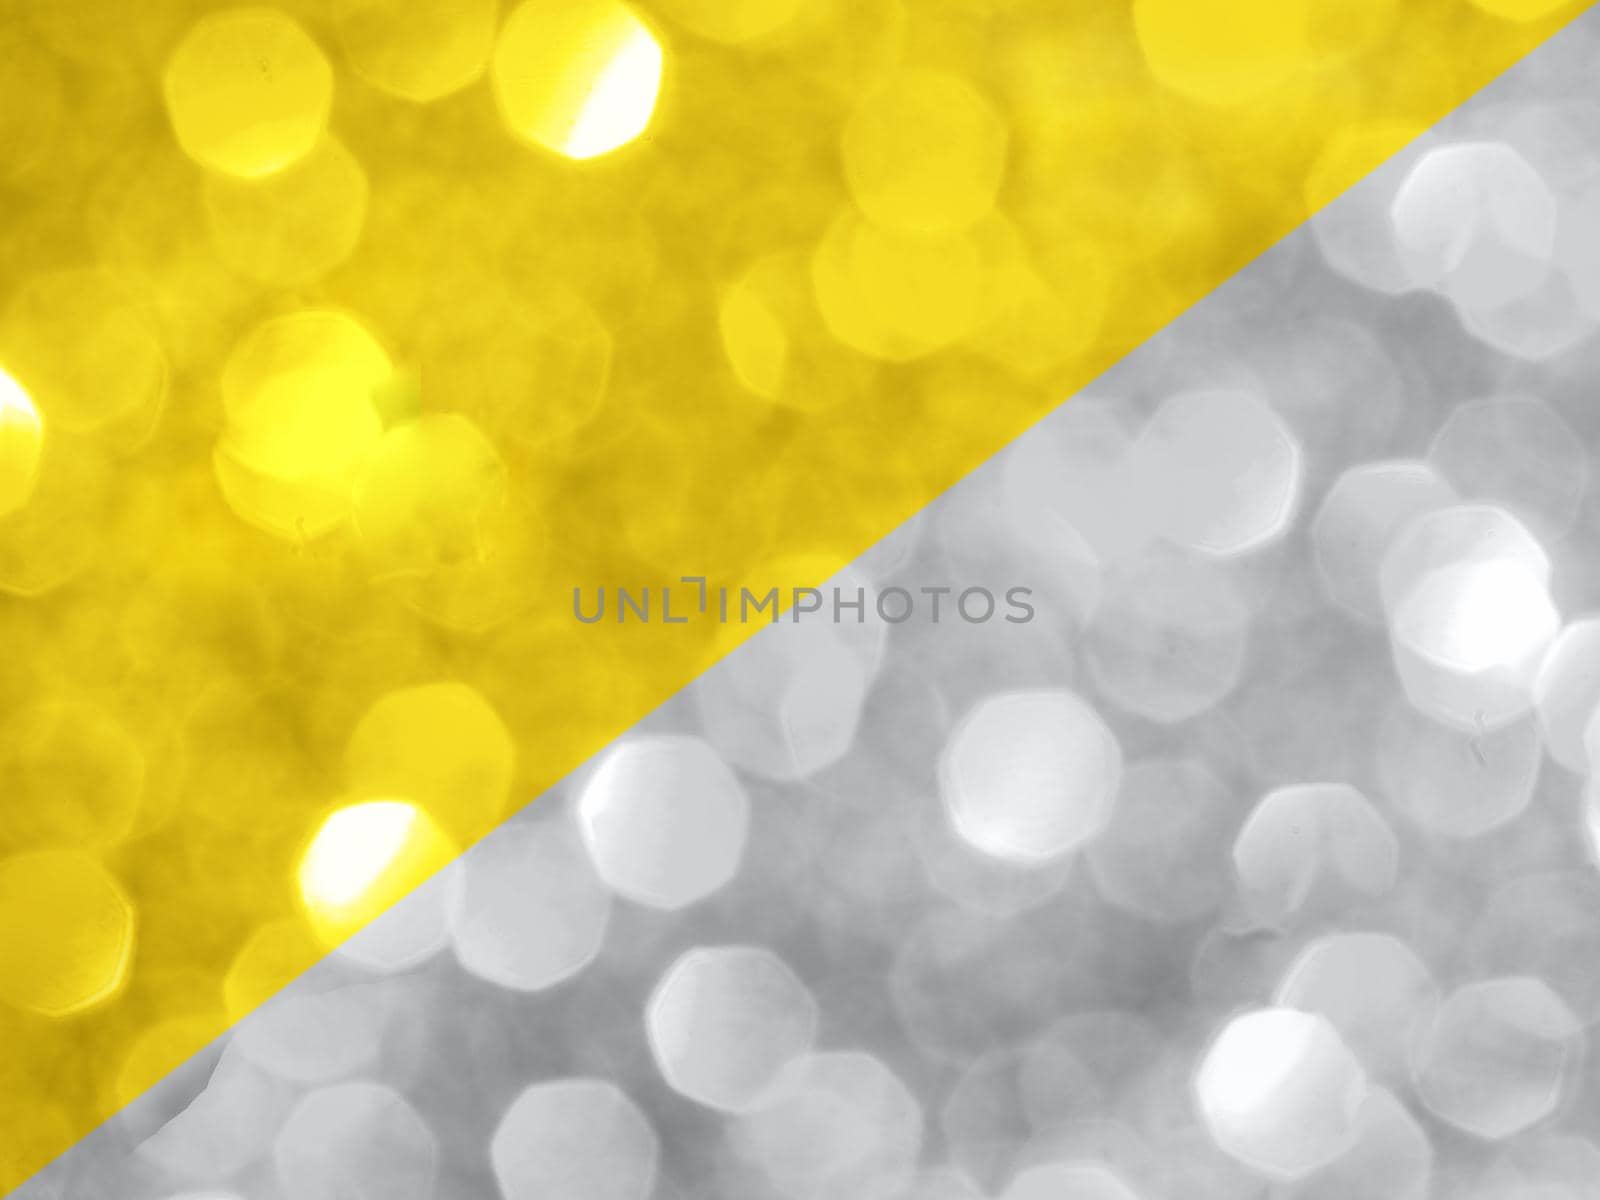 Trendy color of year 2021. Sparkling background made of yellow and gray colors. Color of year 2021 blurred backdrop for holidays and parties. Copy space